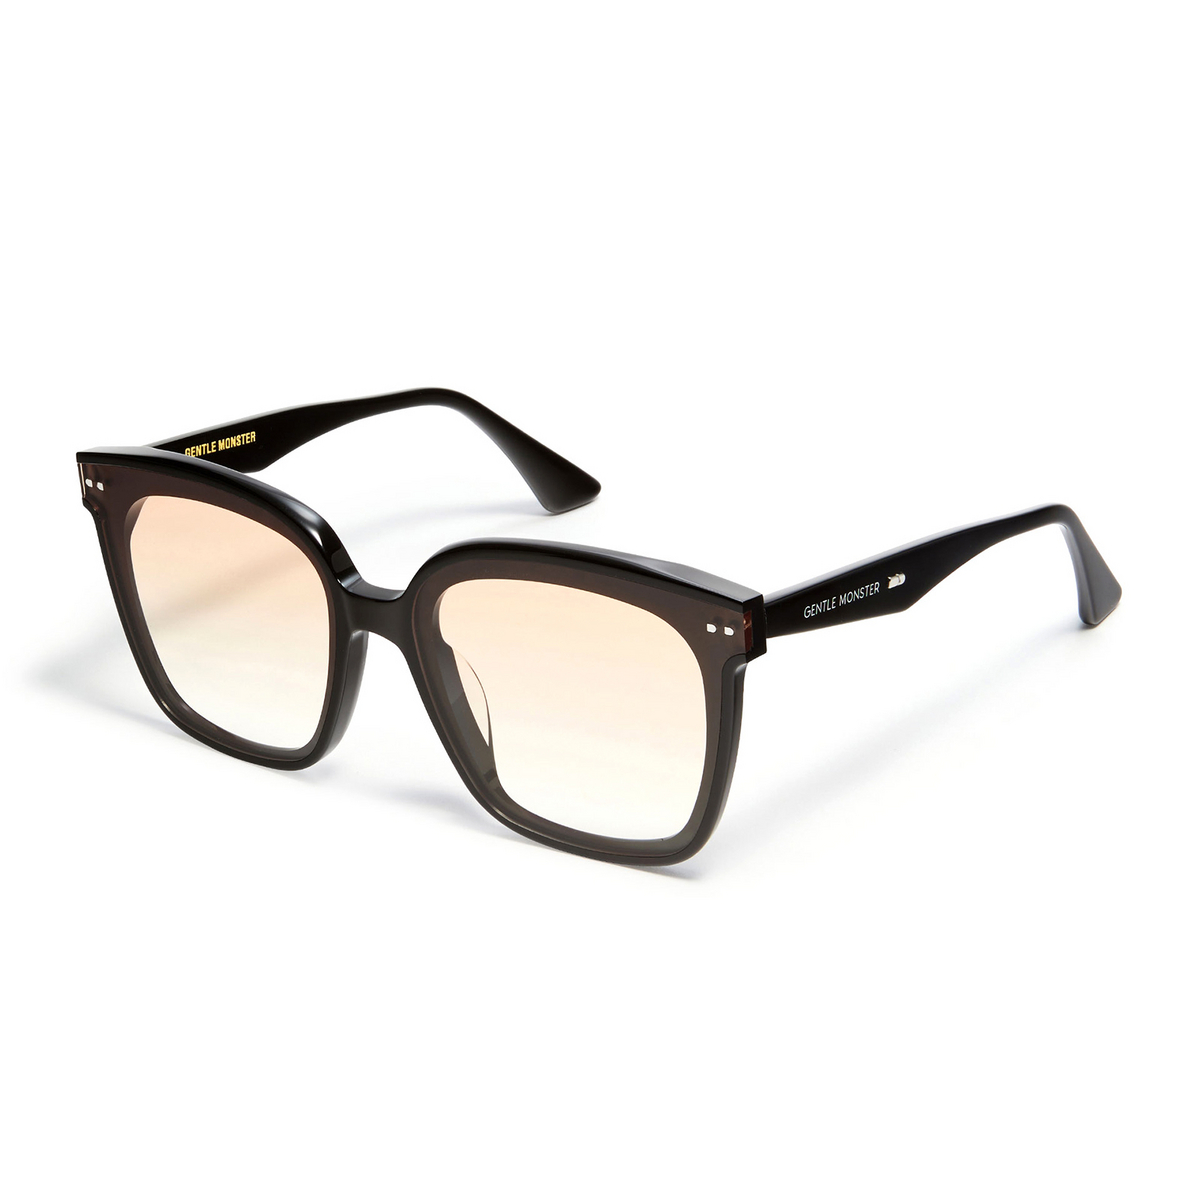 Gentle Monster® Square Sunglasses: Lo Cell color Black 01OG - three-quarters view.